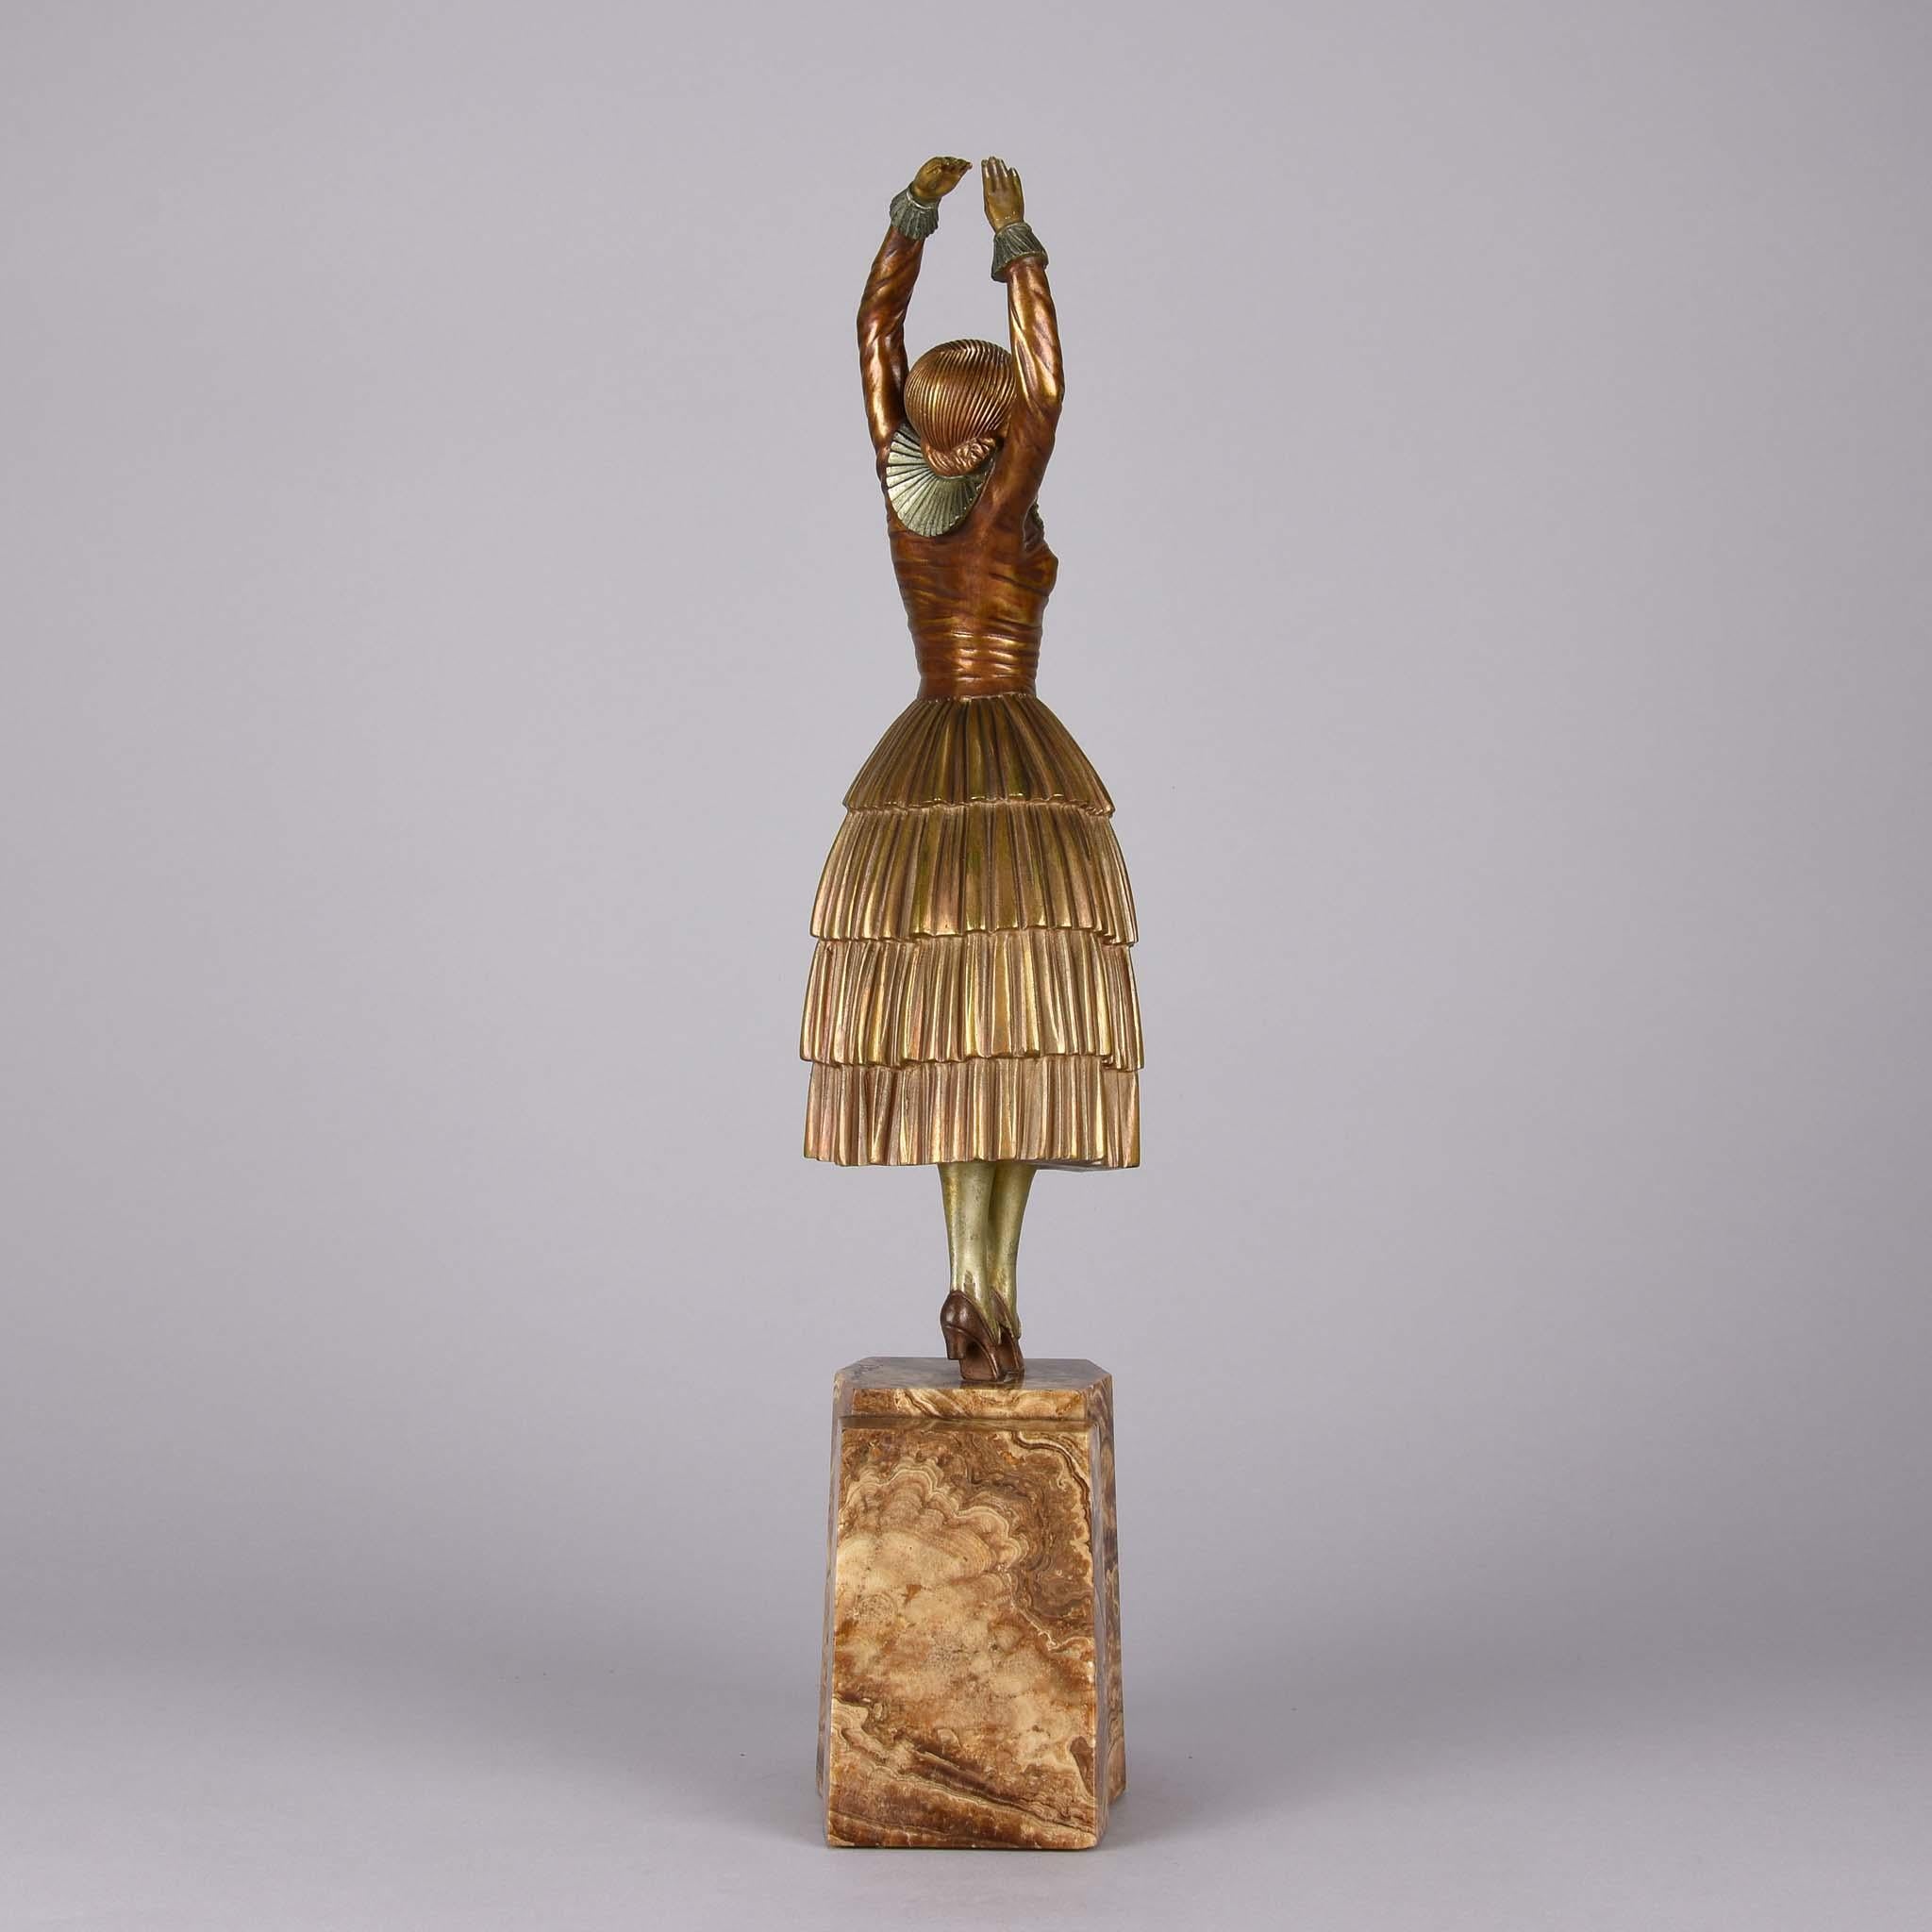 A beautiful early 20th century Art Deco cold painted gilt and enamel bronze figurine of a dancer in stretched pose wearing full period attire, signed Chiparus. And raised on a brown and cream onyx shaped plinth.

Ballet at the turn of the century